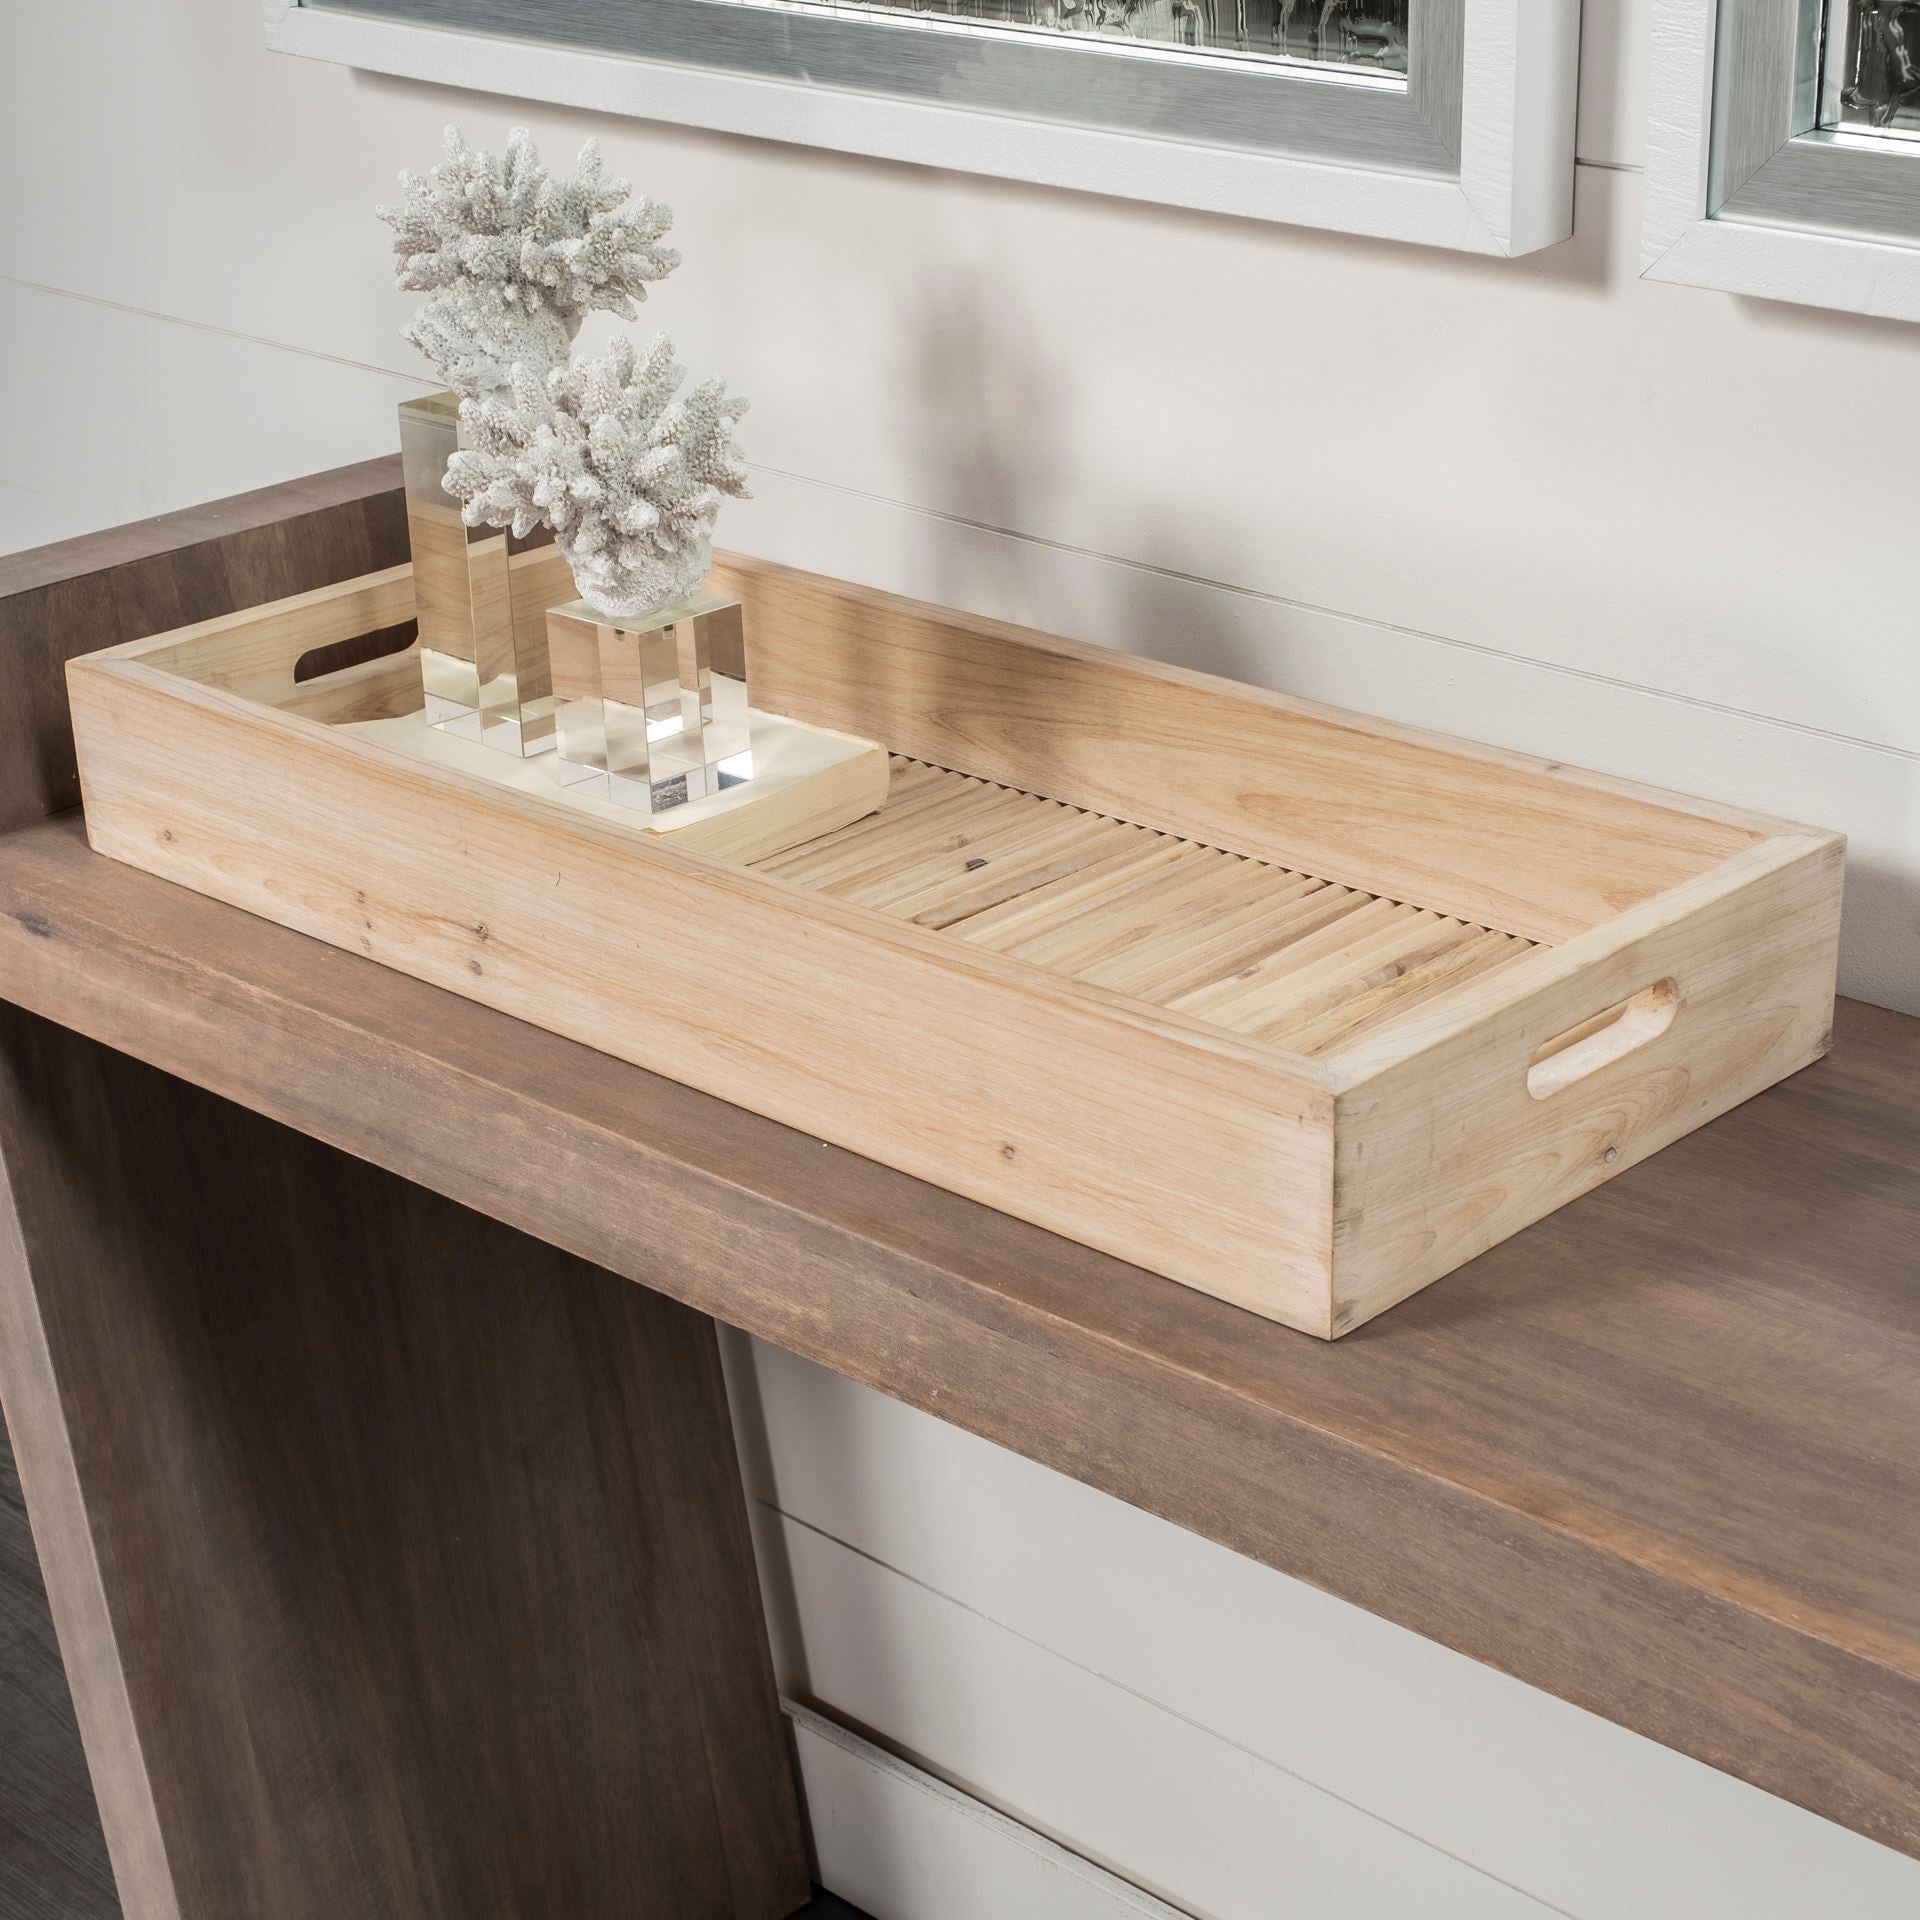 Natural Blonde Wood With Coastal Inspired Tray